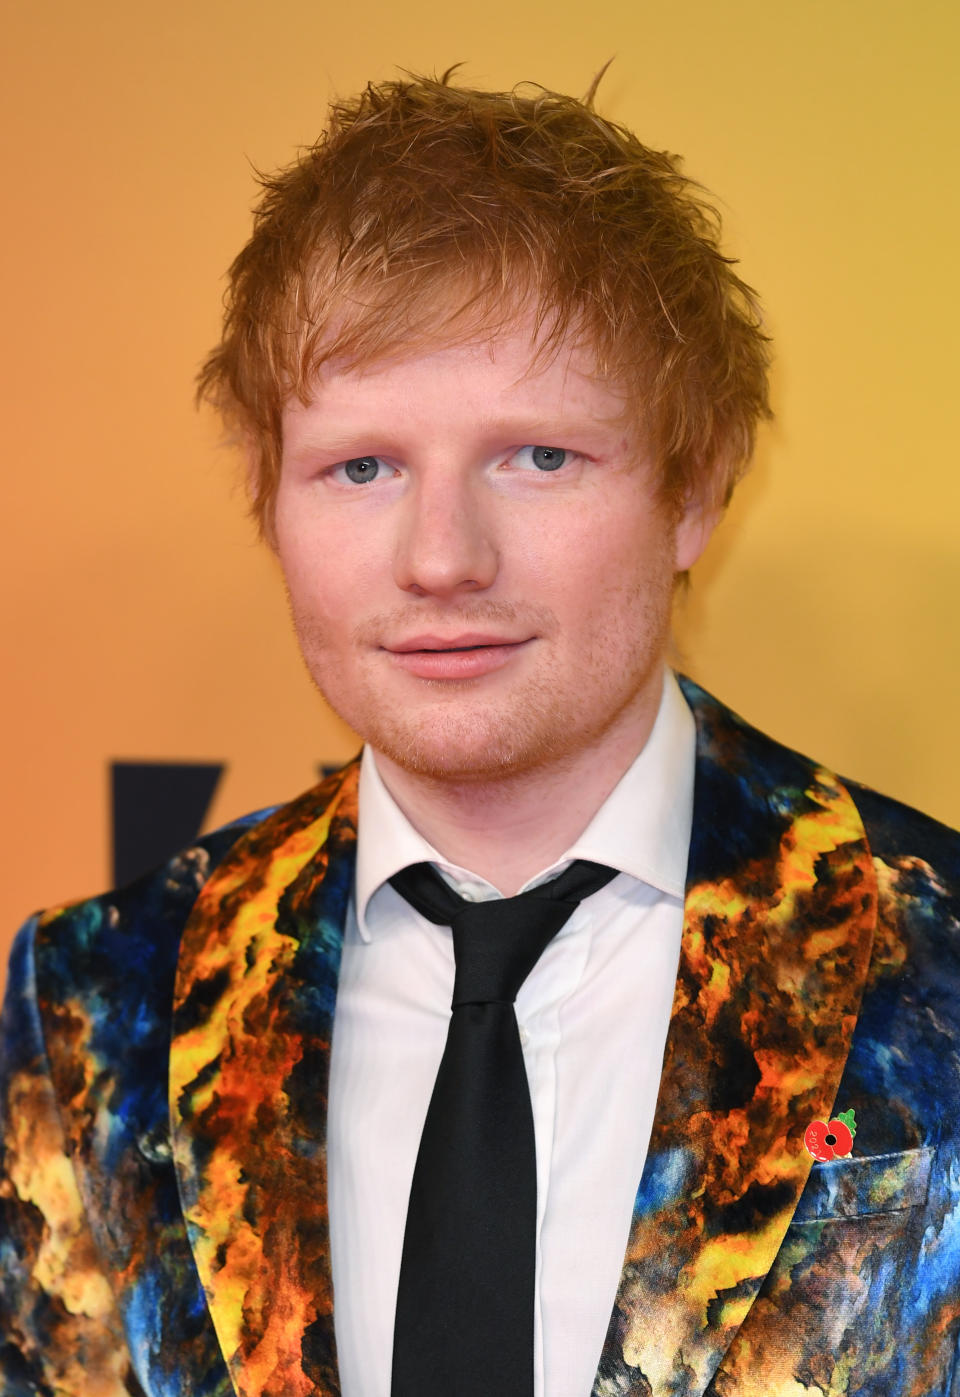 Singer Ed Sheeran, pictured at the 2021 MTV European Music Awards, has spoken about the effect drinking excessively had on his health. (PA)